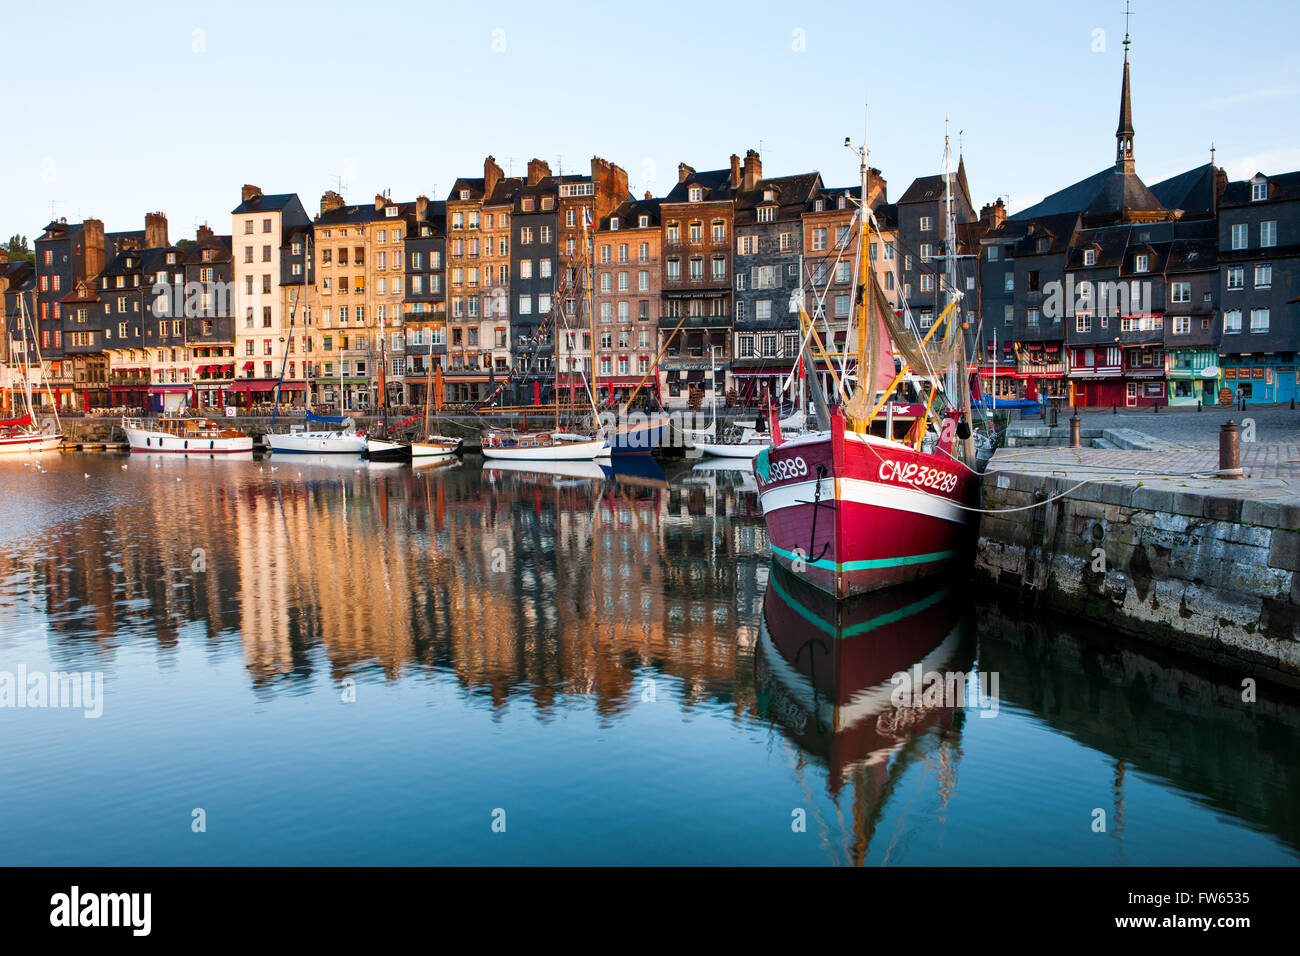 Houses and fishing boats at the old harbor with reflections in calm water, Vieux Bassin, Honfleur, Calvados, Normandy, France Stock Photo